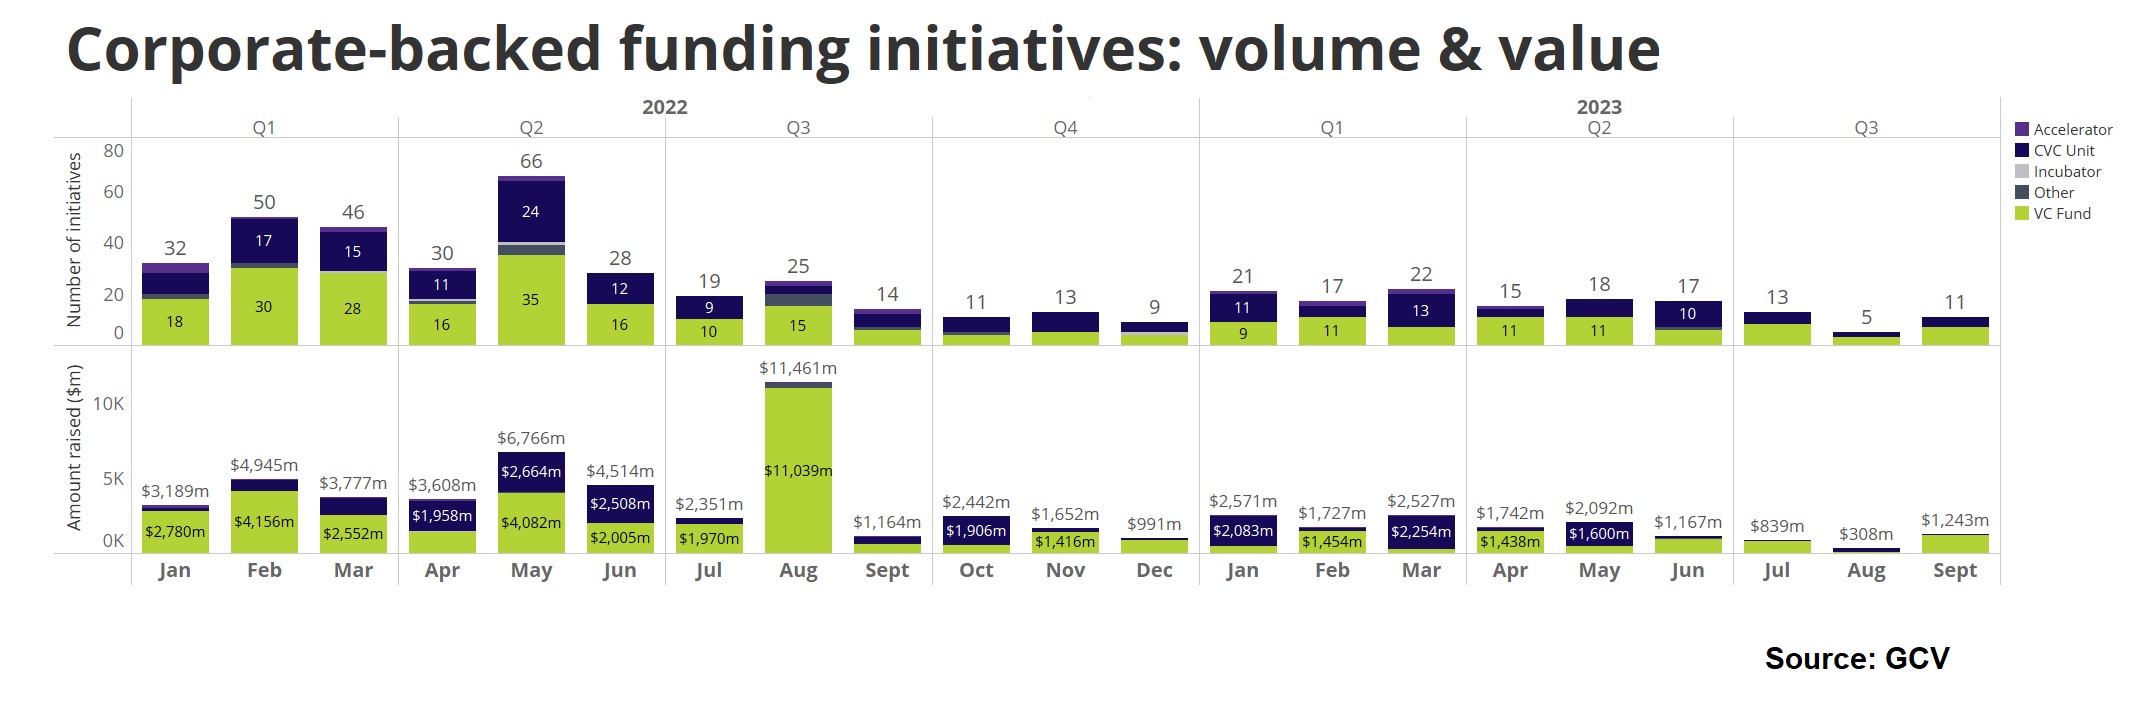 Bar chart showing corporate-backed funding initiatives: volume and value. Source: GCV